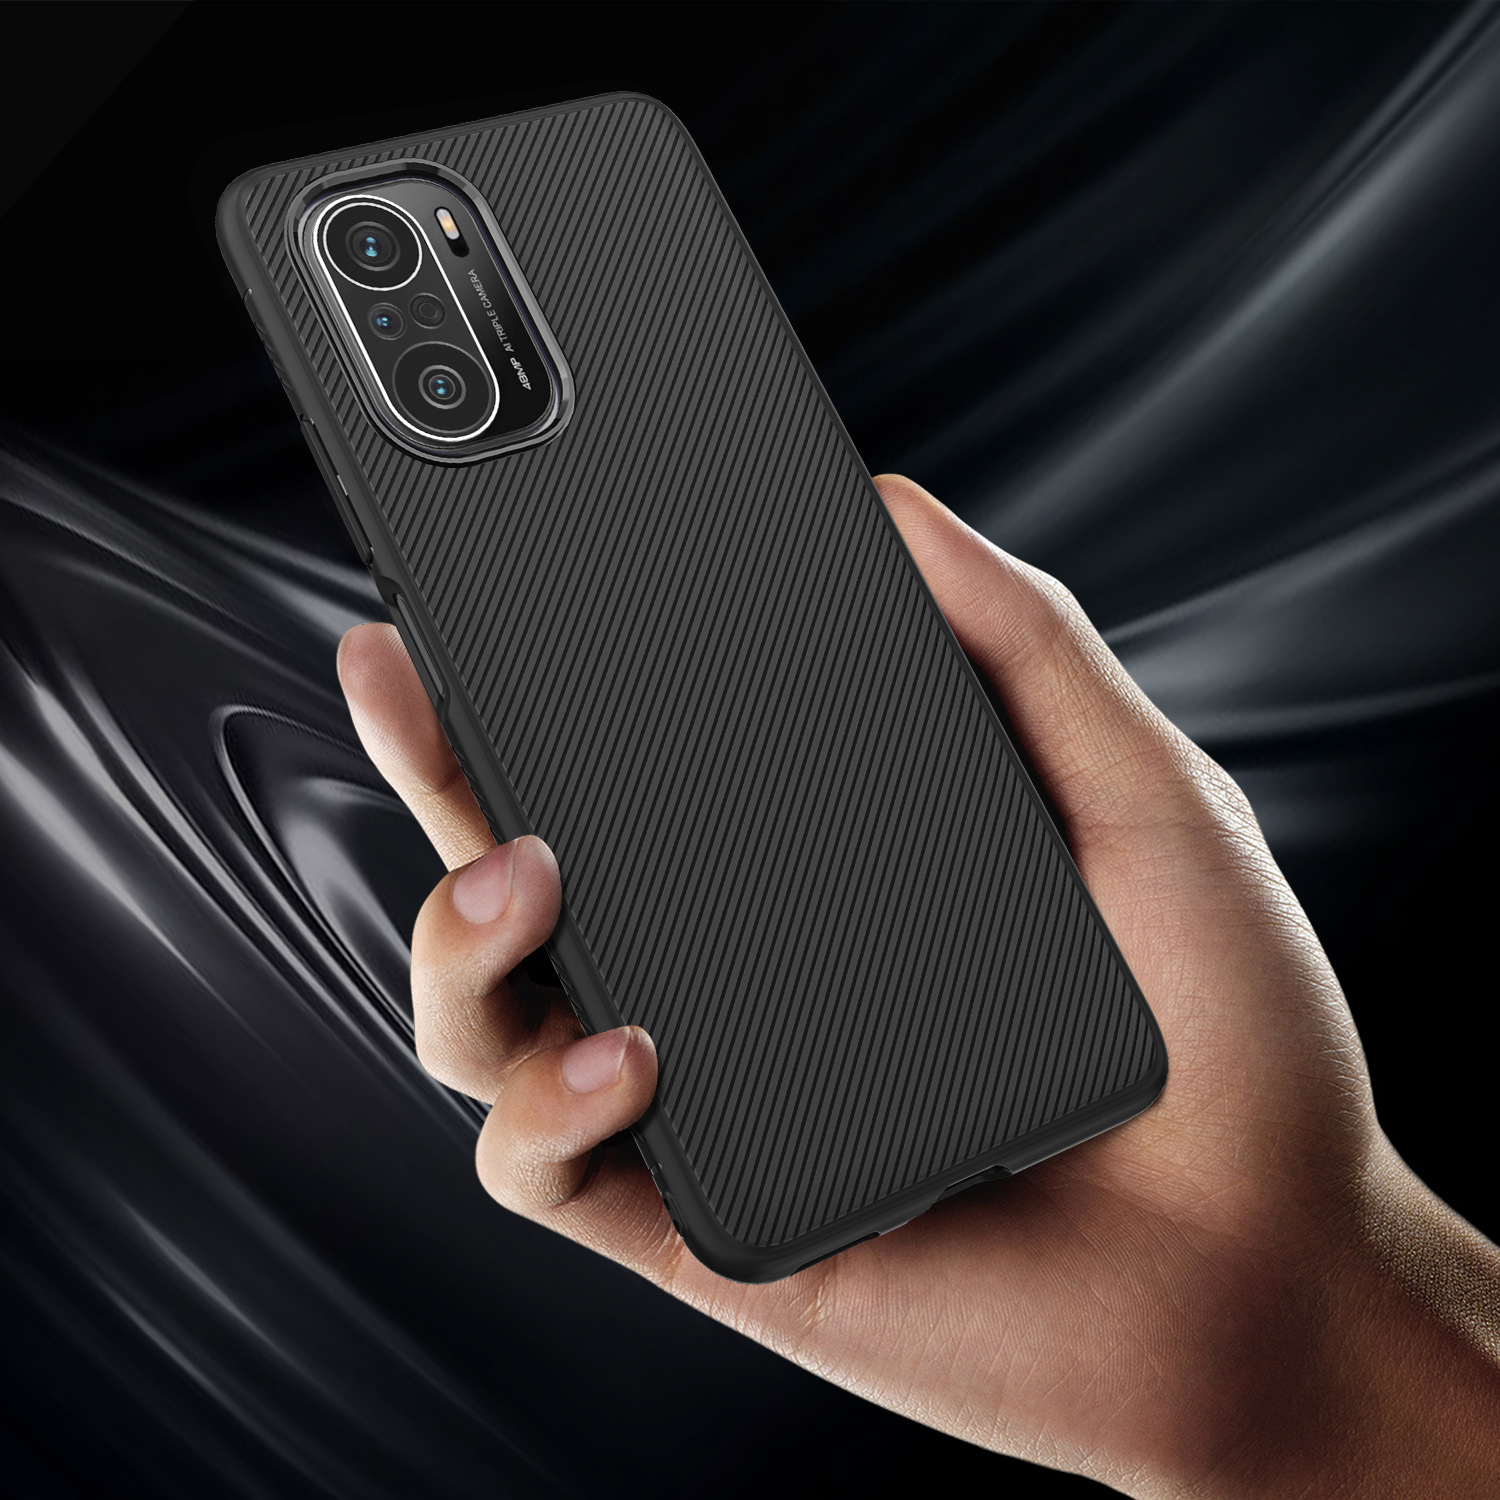 Bakeey for POCO F3 Global Version Case Carbon Fiber Texture Slim Soft Silicone Shockproof Protective Case Back Cover